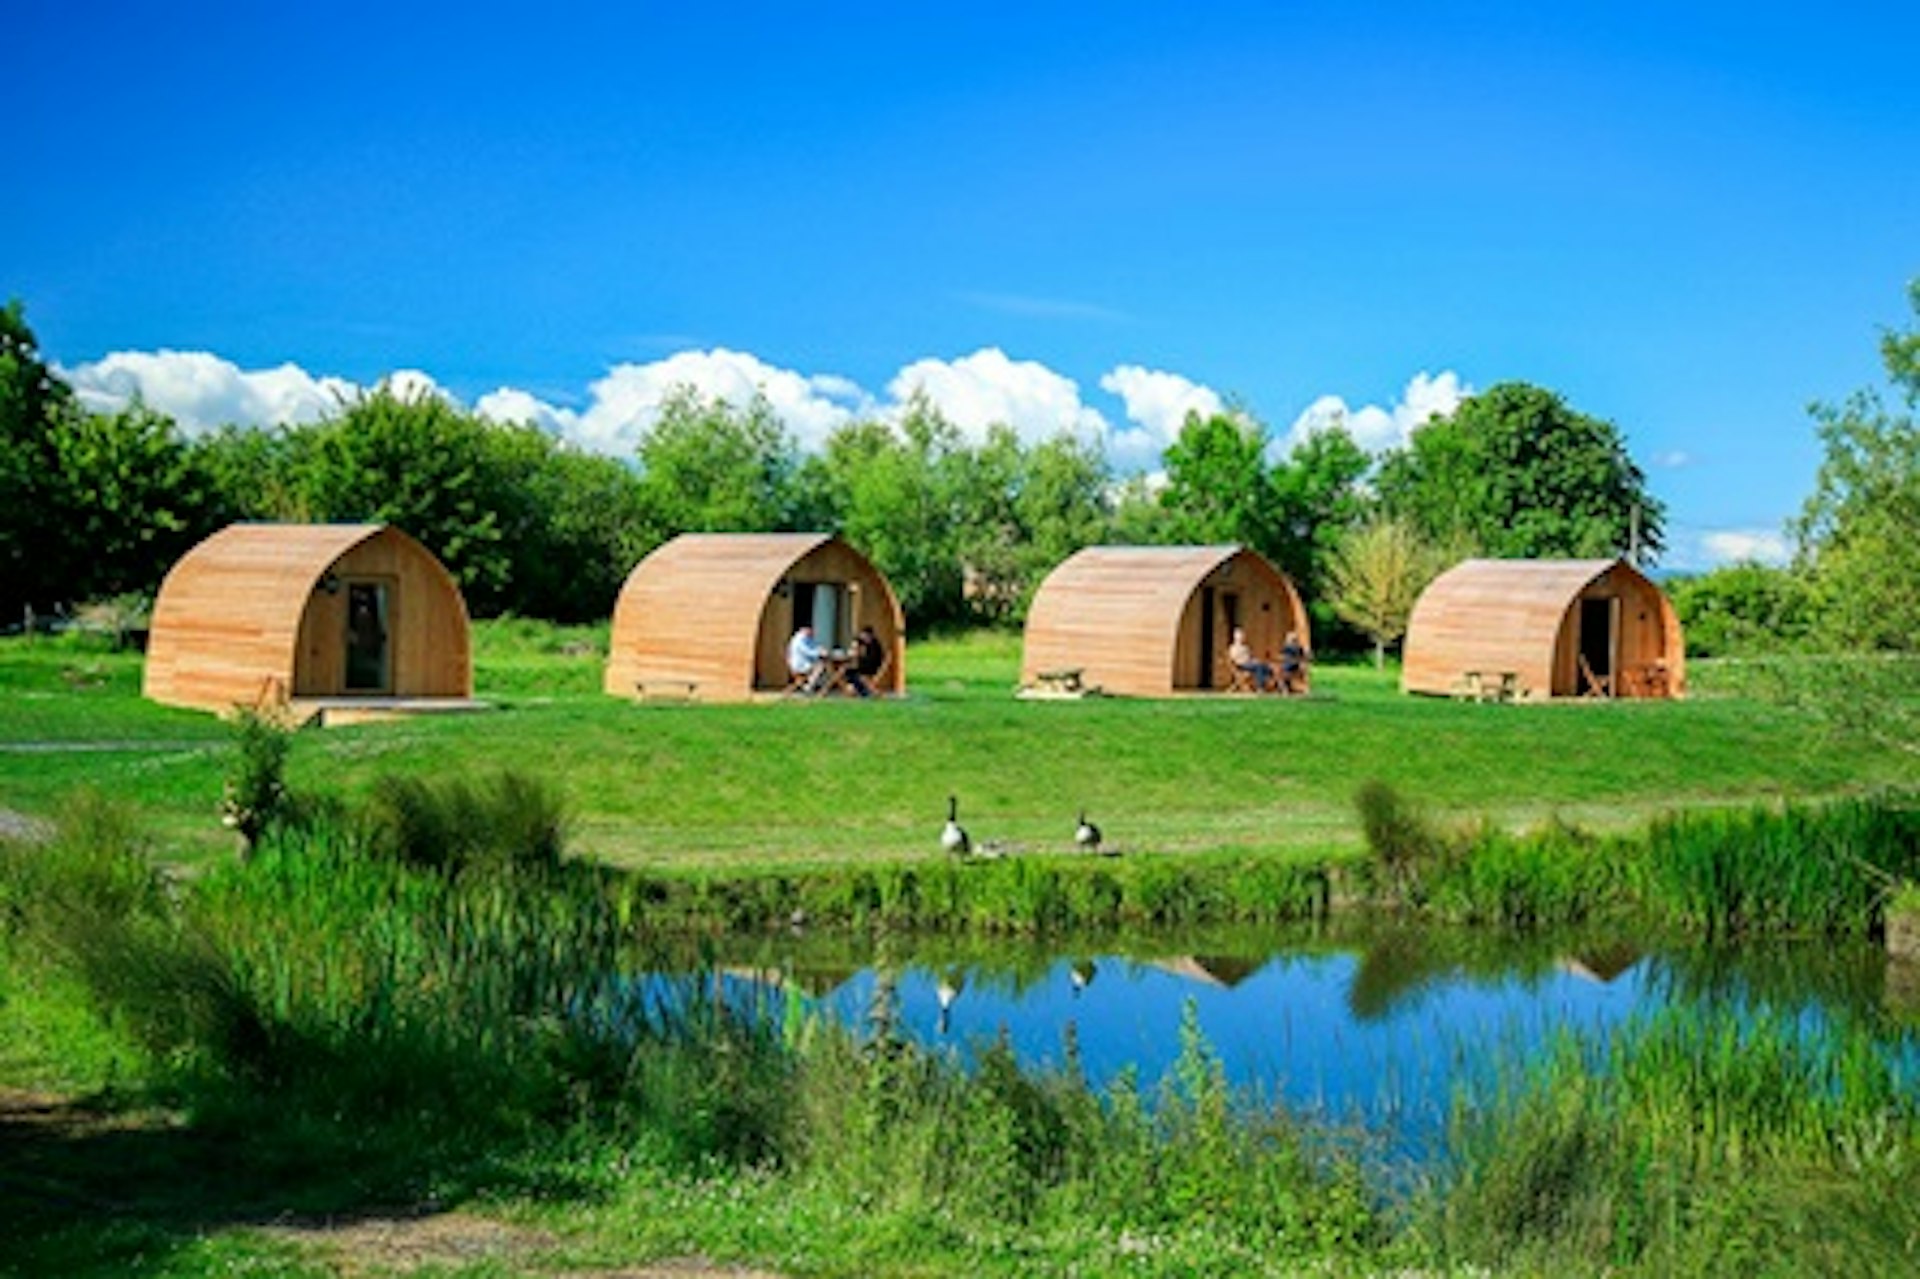 Two Night Adventure Glamping Escape with Axe Throwing or Archery for Two at Wall Eden Farm 1